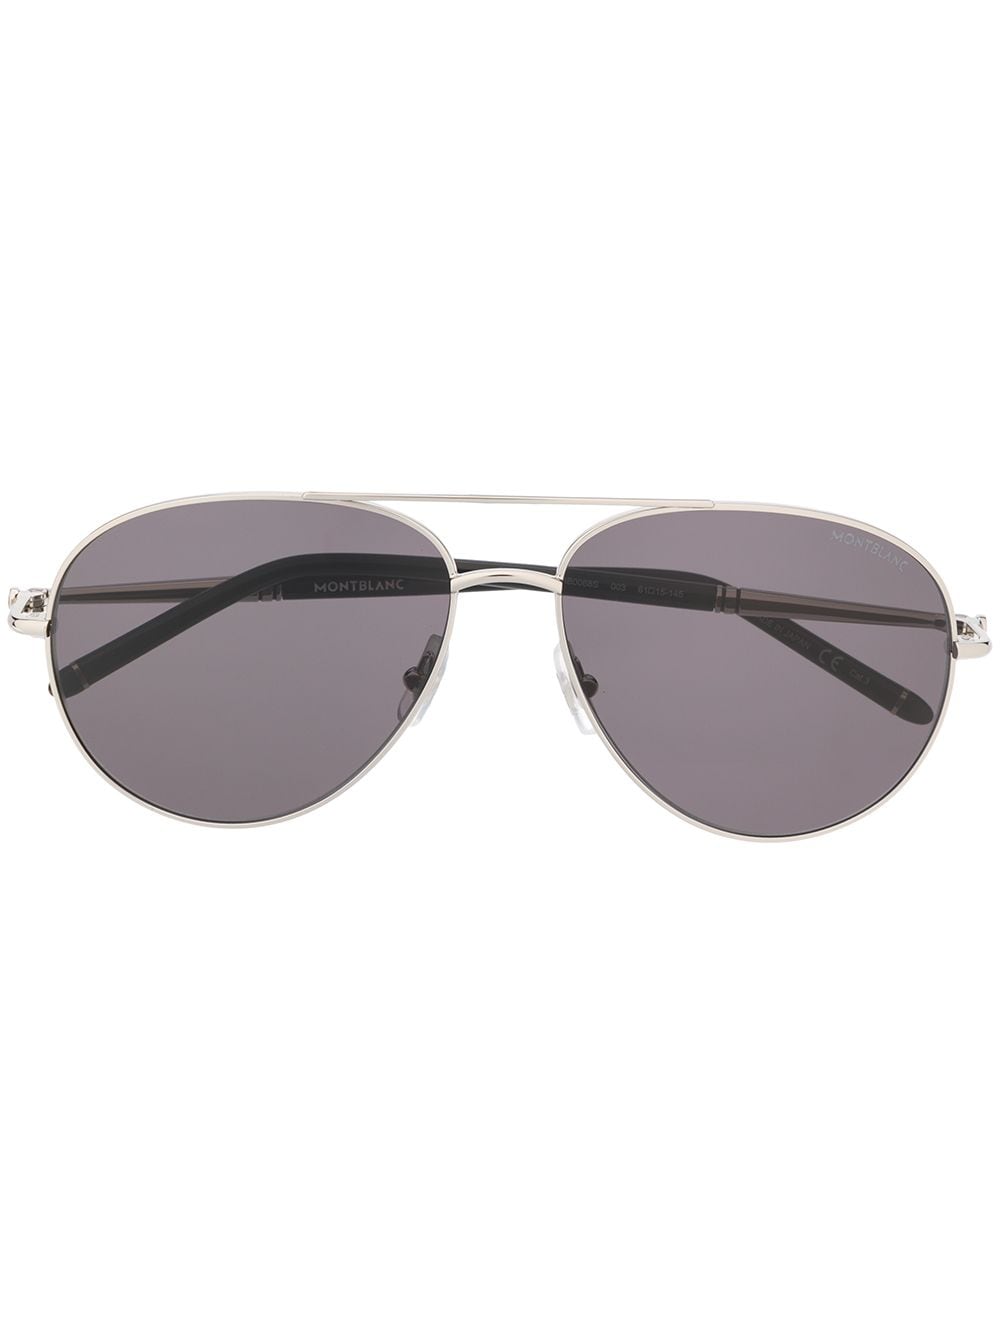 Montblanc Aviator Frame Sunglasses In Silver